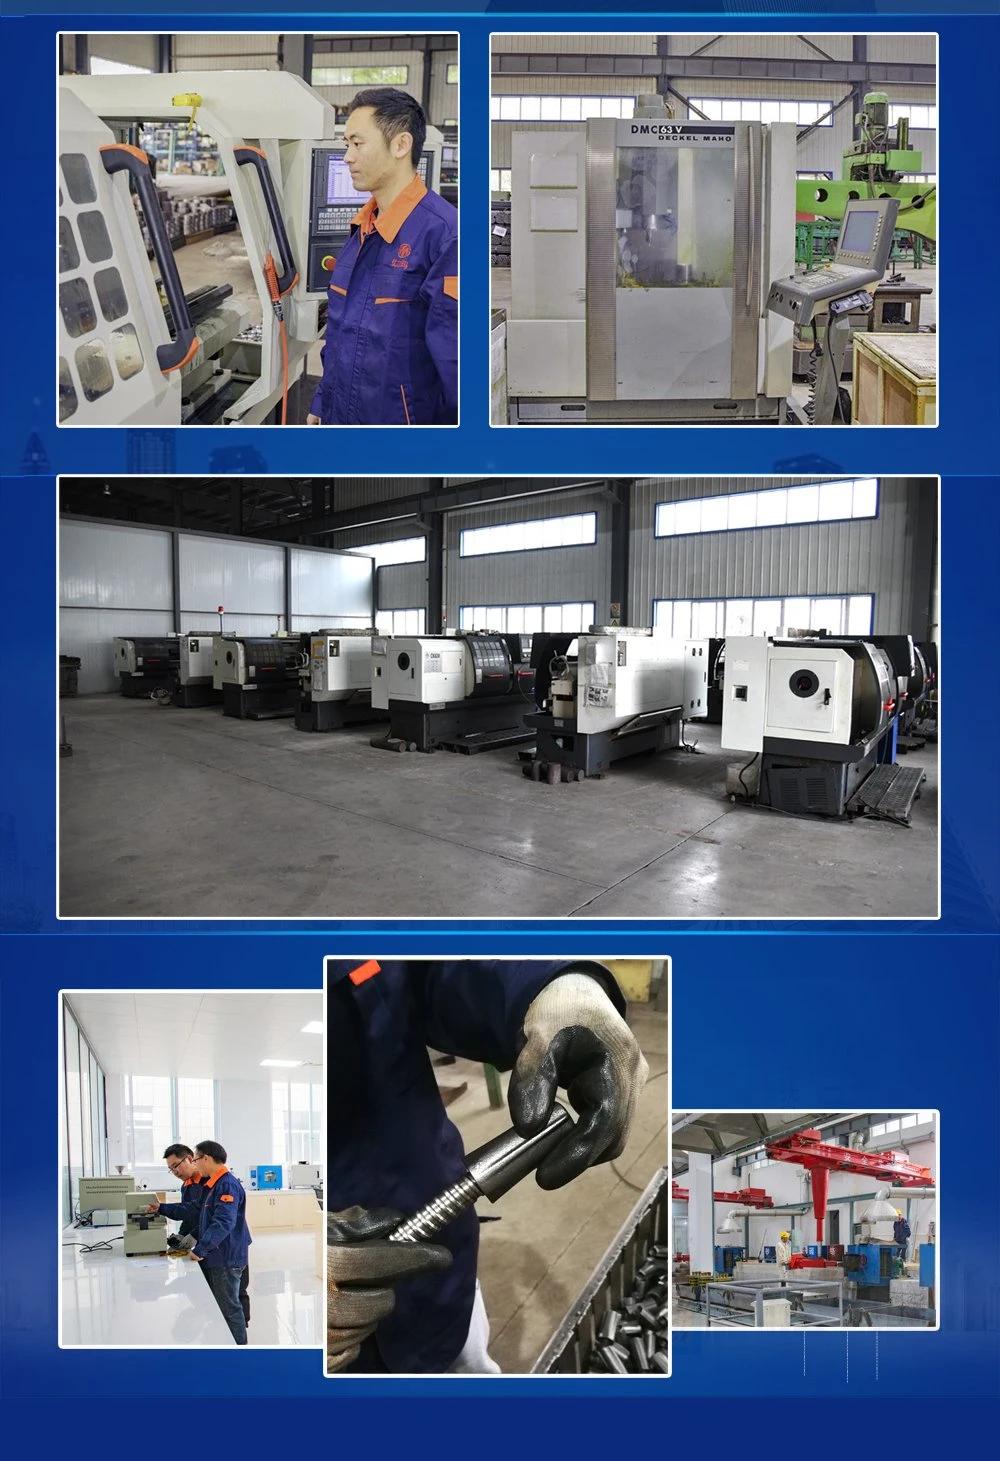 Component, Construction, Machining, Equipment, Mining, Nuts, Assembling, Power Fitting, Accessories, Tools, Bars, Hot Galvanized